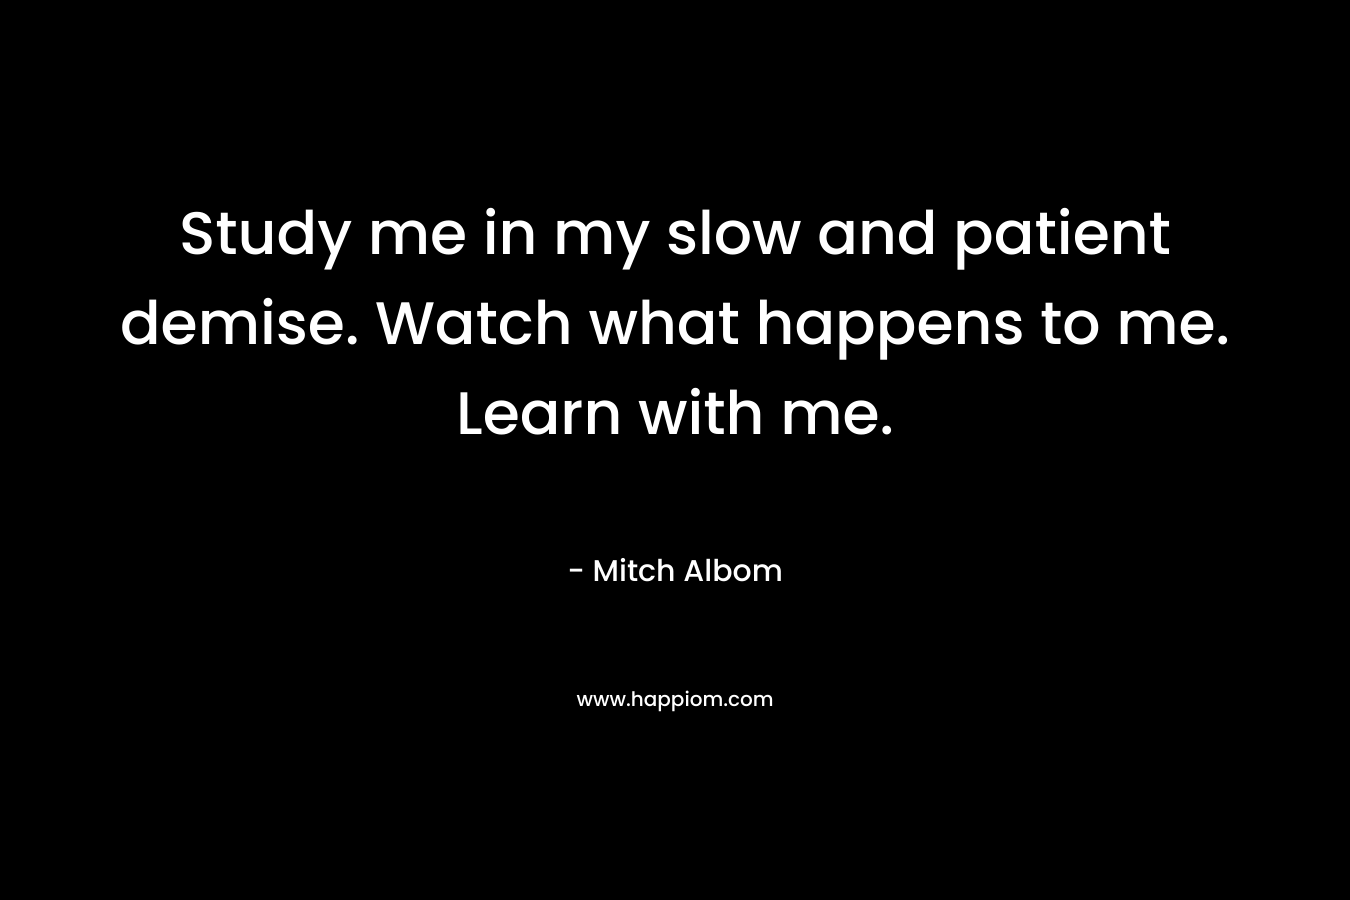 Study me in my slow and patient demise. Watch what happens to me. Learn with me. – Mitch Albom